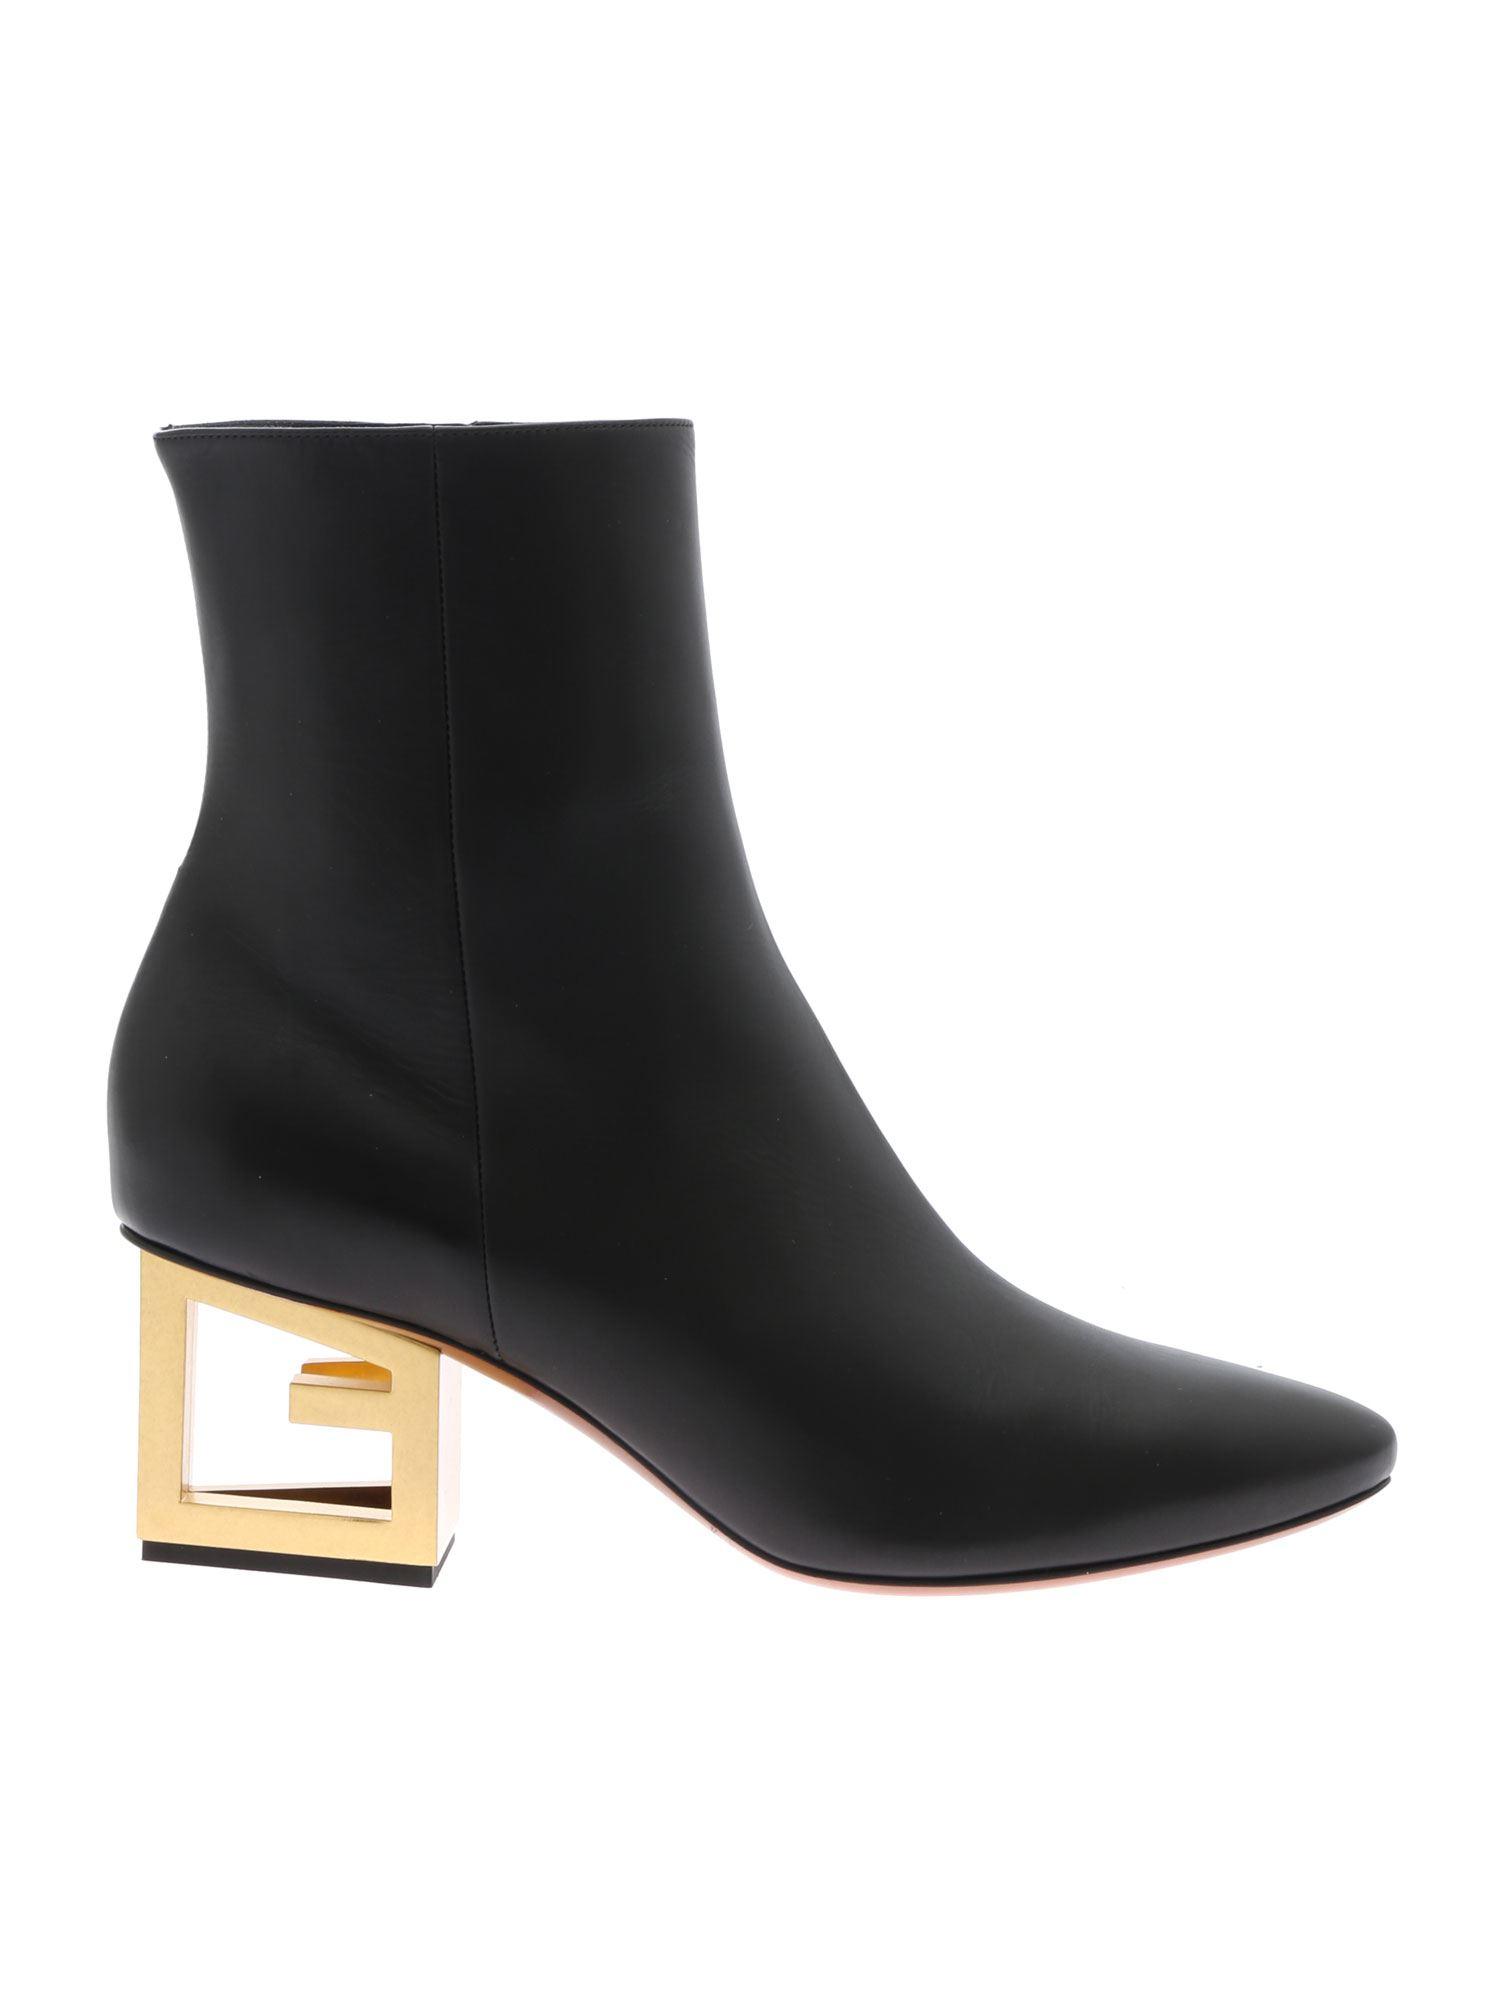 Givenchy Triangle Pointy Ankle Boots In Black in Black - Lyst